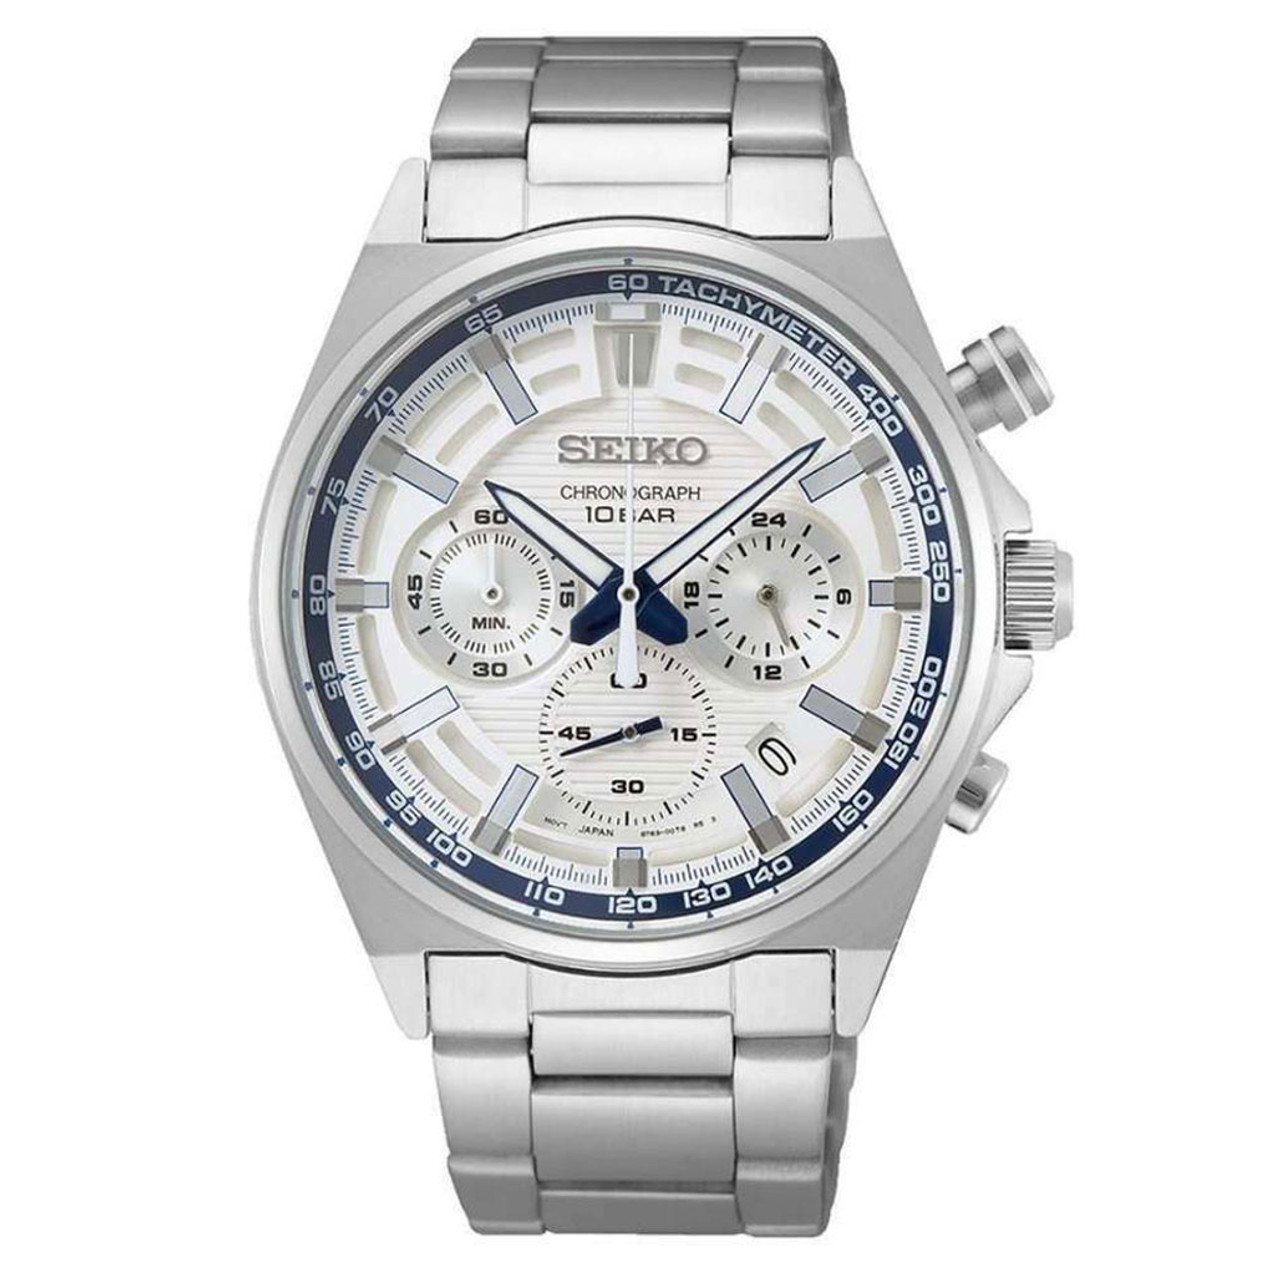 Seiko Quartz Chronograph with 60-minute timer, stop-watch style pusher and  a 24-hour sub-